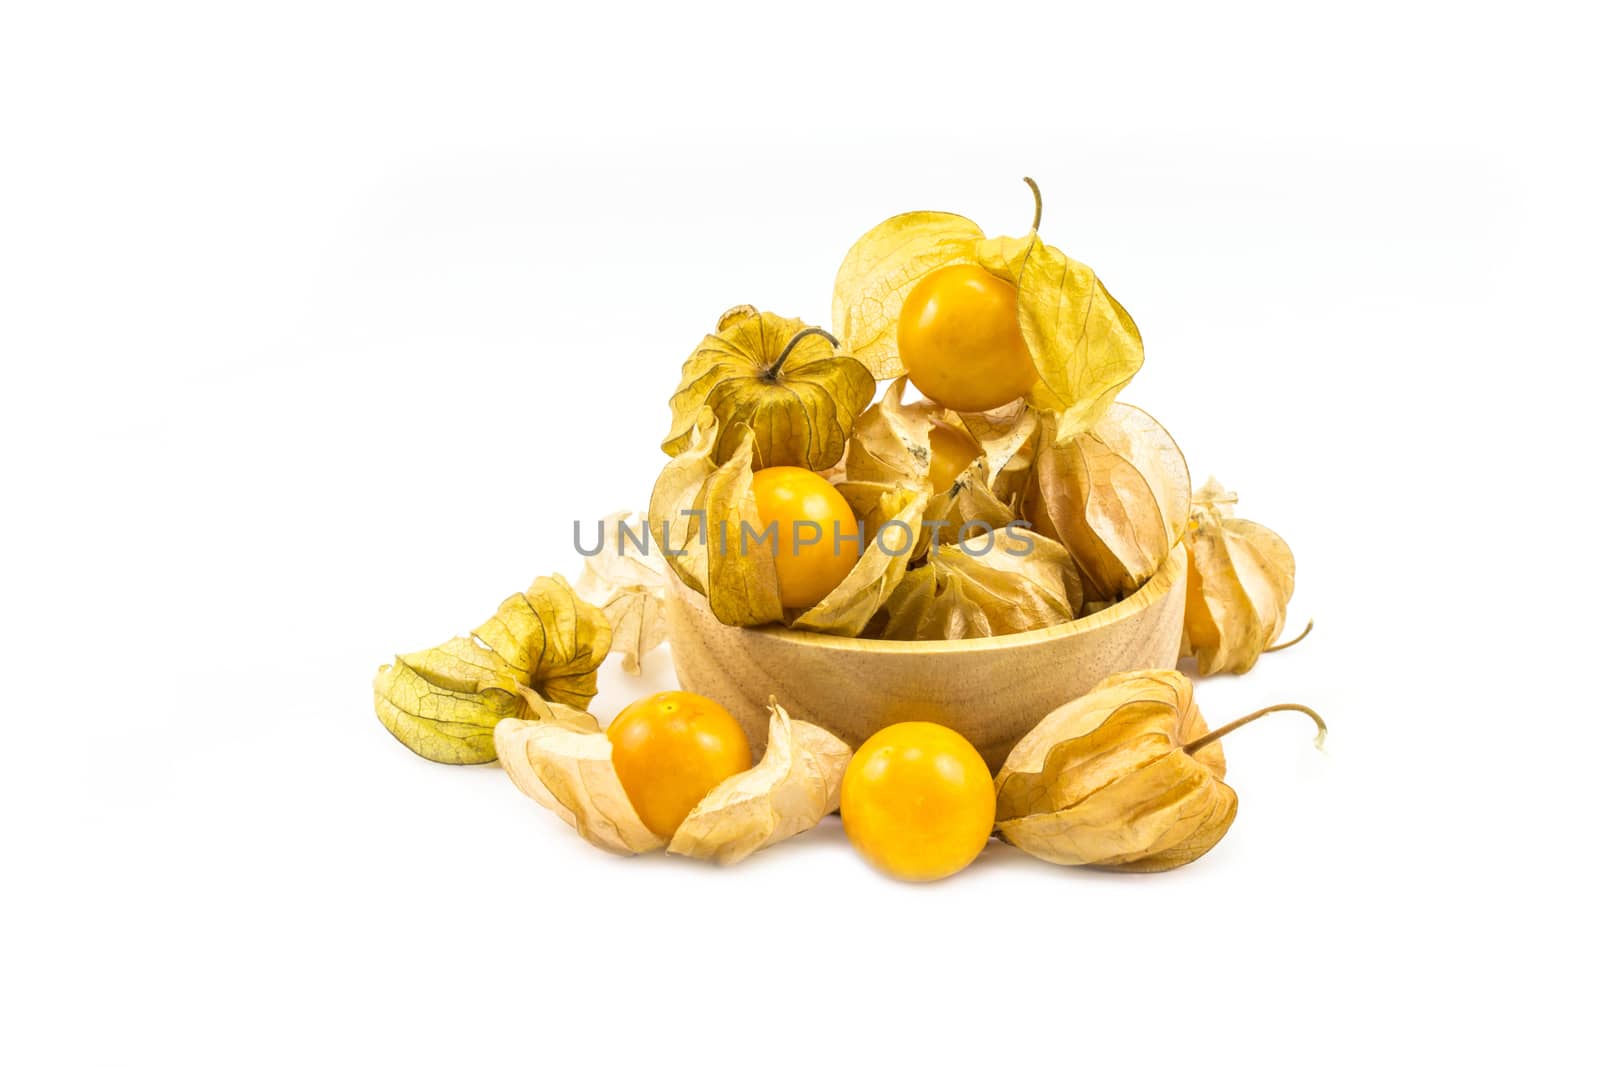 Cape gooseberry put in wood bowl physalis isolated on white background.